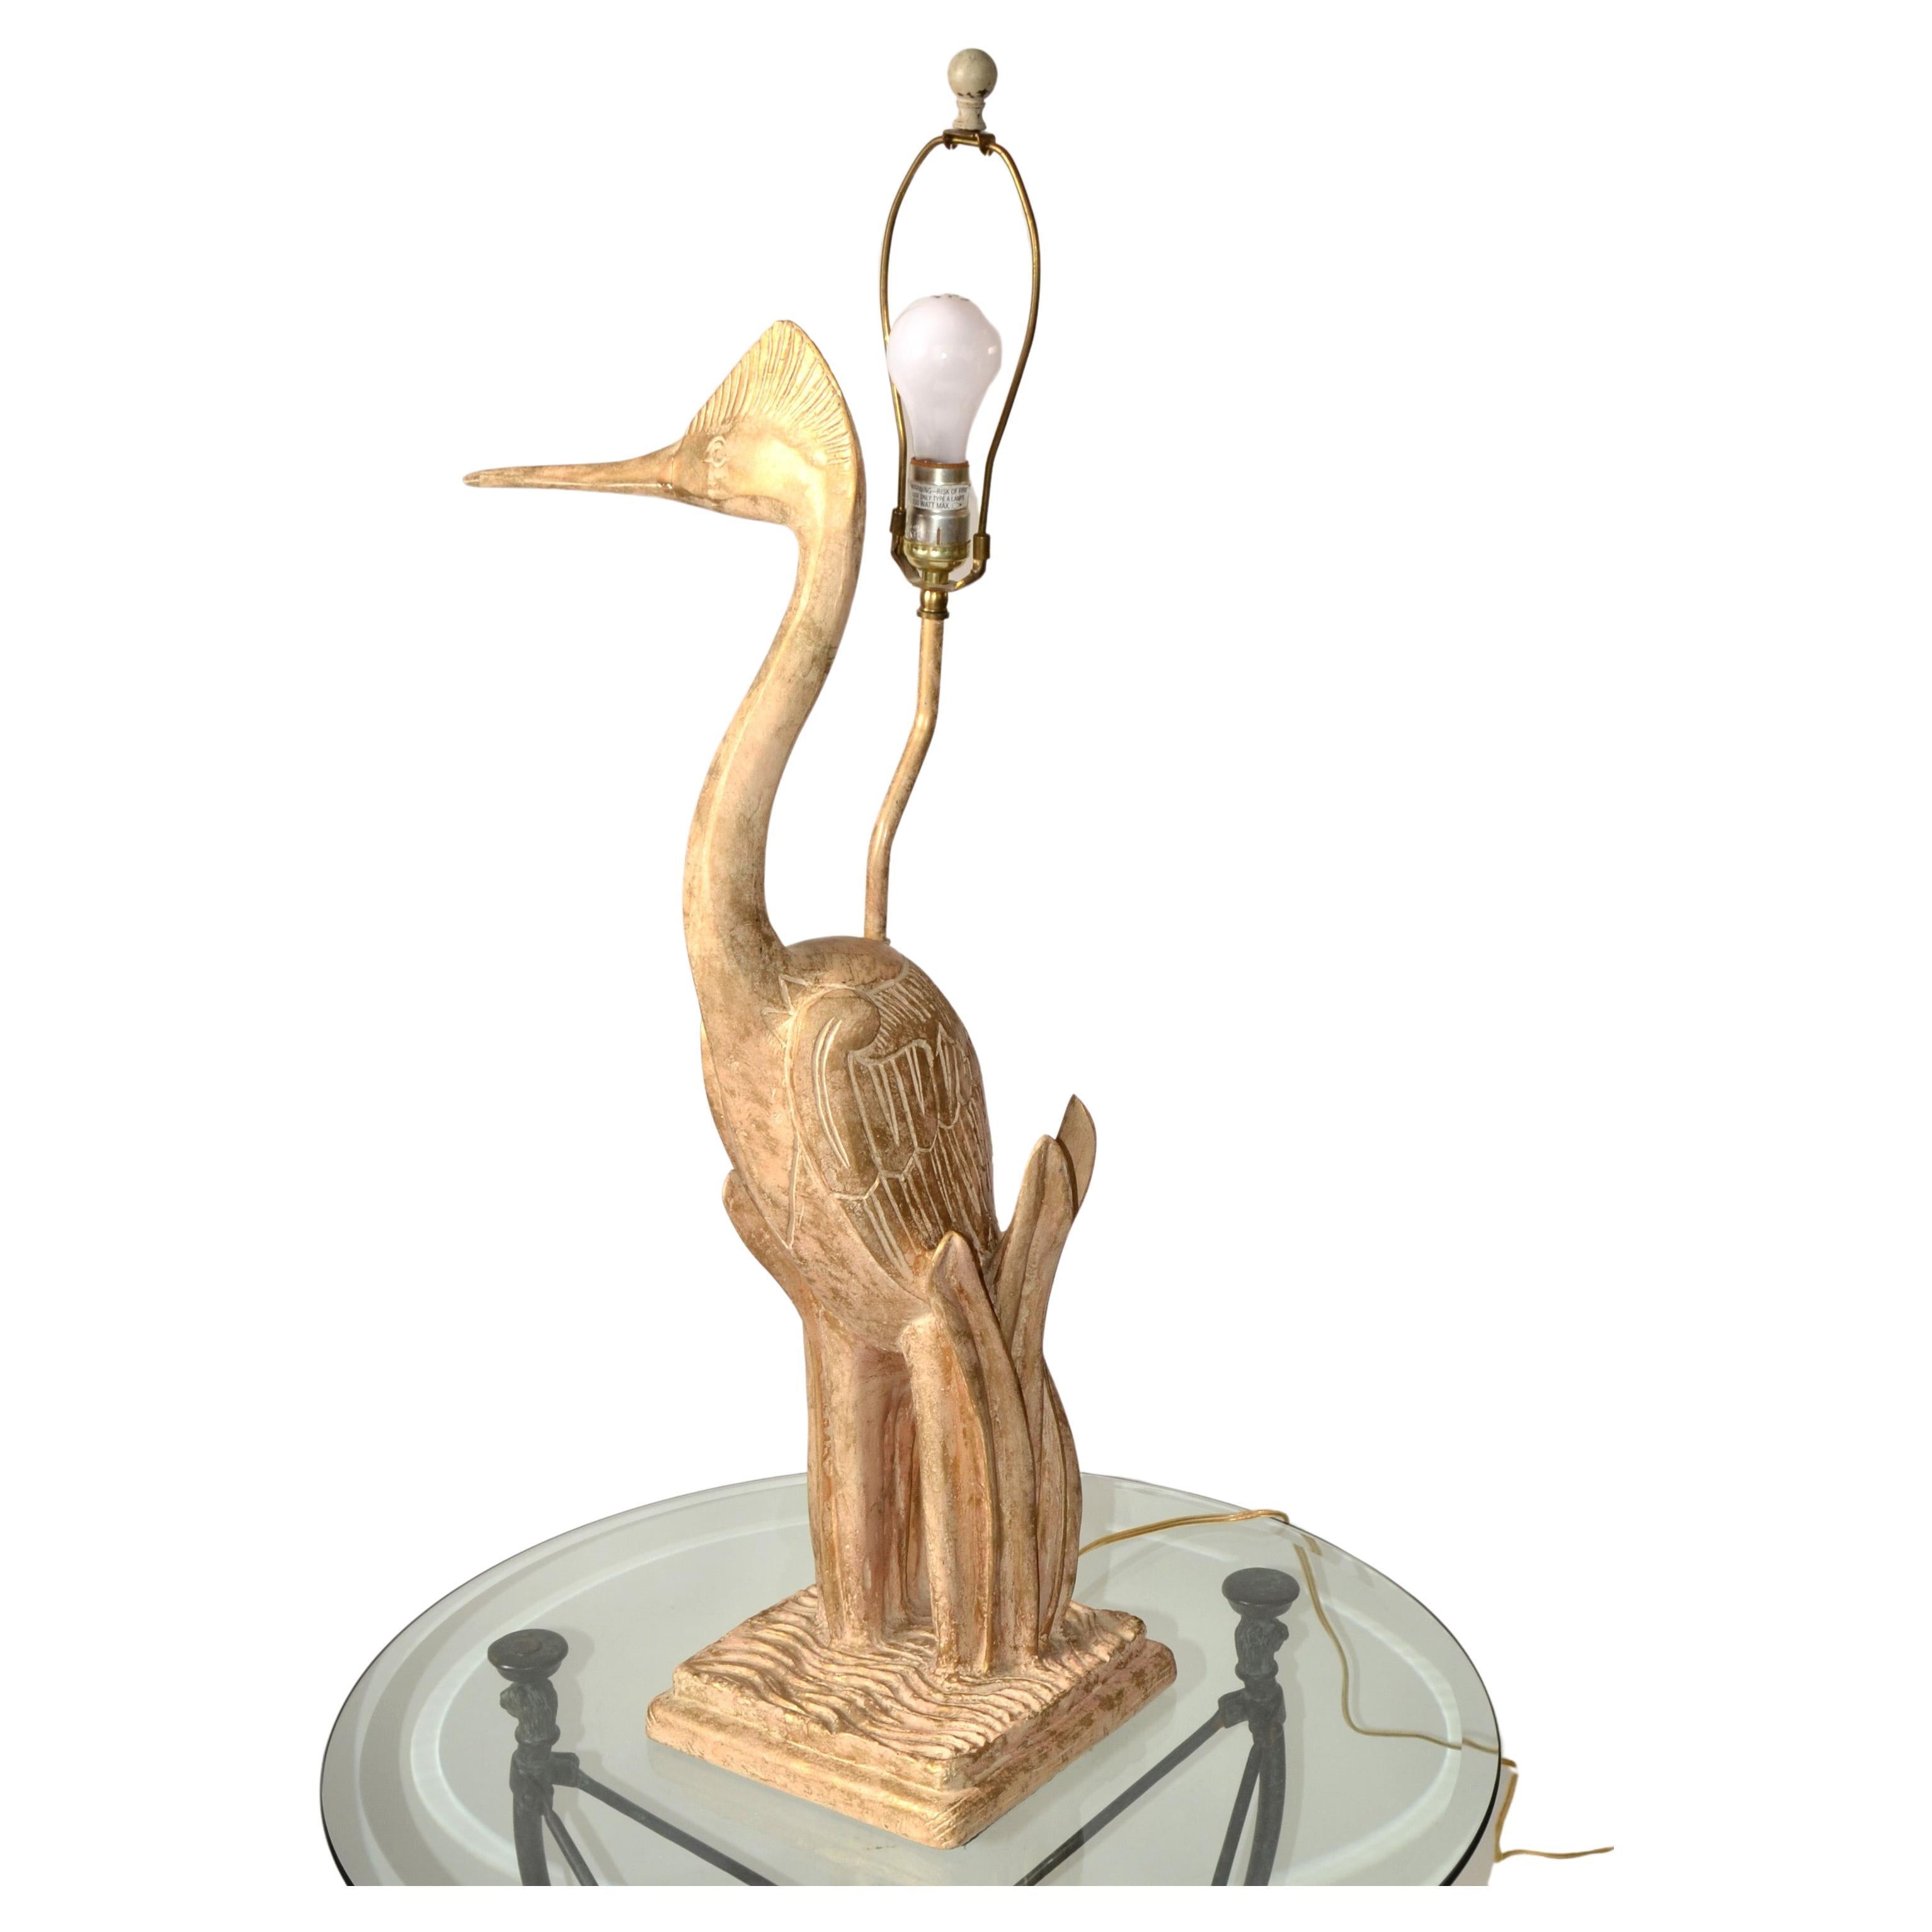 A one-piece hand carved Cedar Wood Heron Bird Animal Sculpture Table Lamp, 37 Inches tall with Harp and Brass Finial.
The Craftsmanship is very detailed, and the Heron is carved out of a single woodblock. 
US wiring and takes a regular or LED light